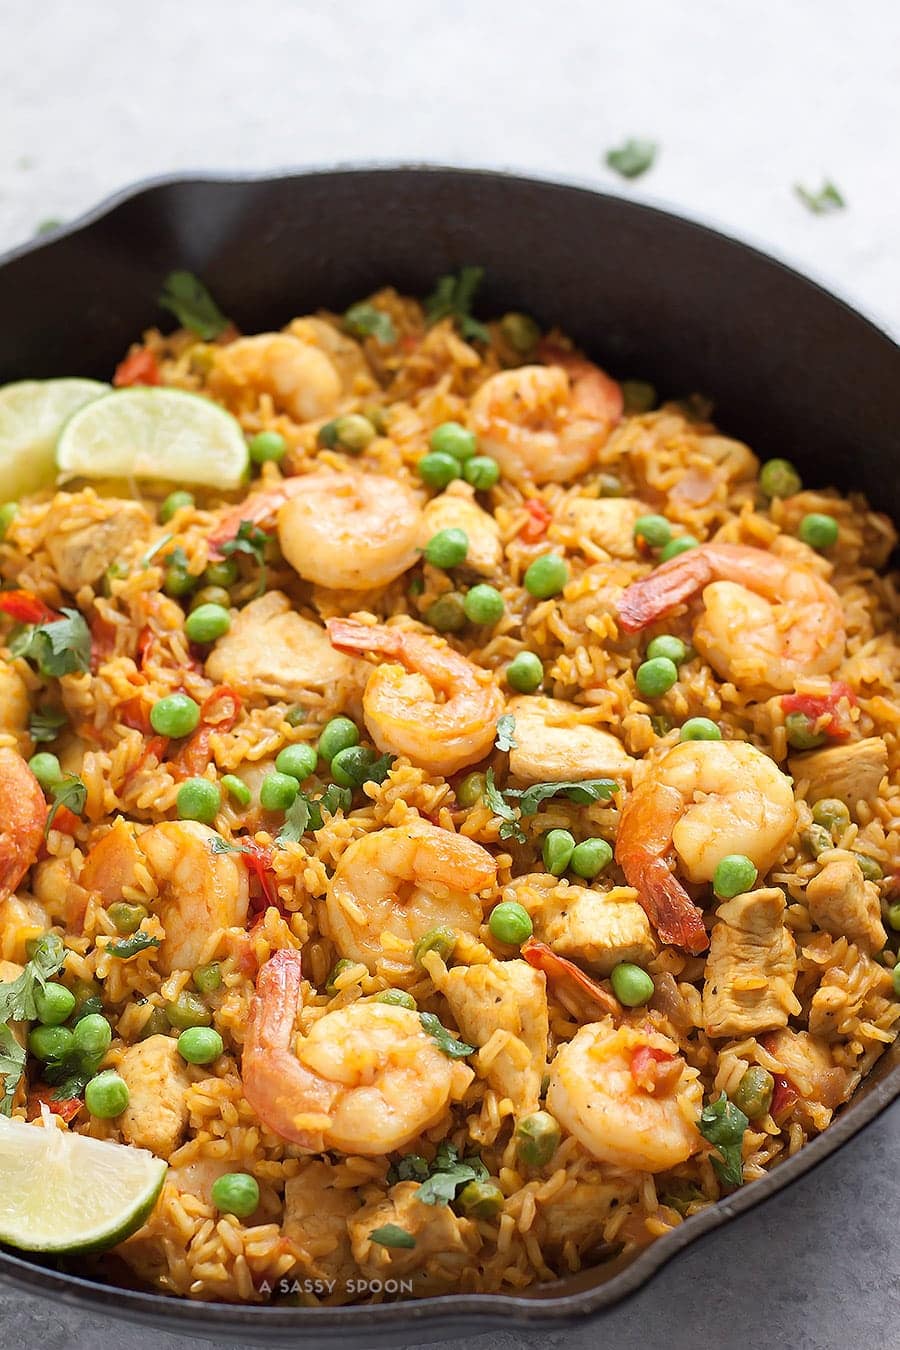 Chicken and shrimp paella cooking with brown rice, peas, and lime slices